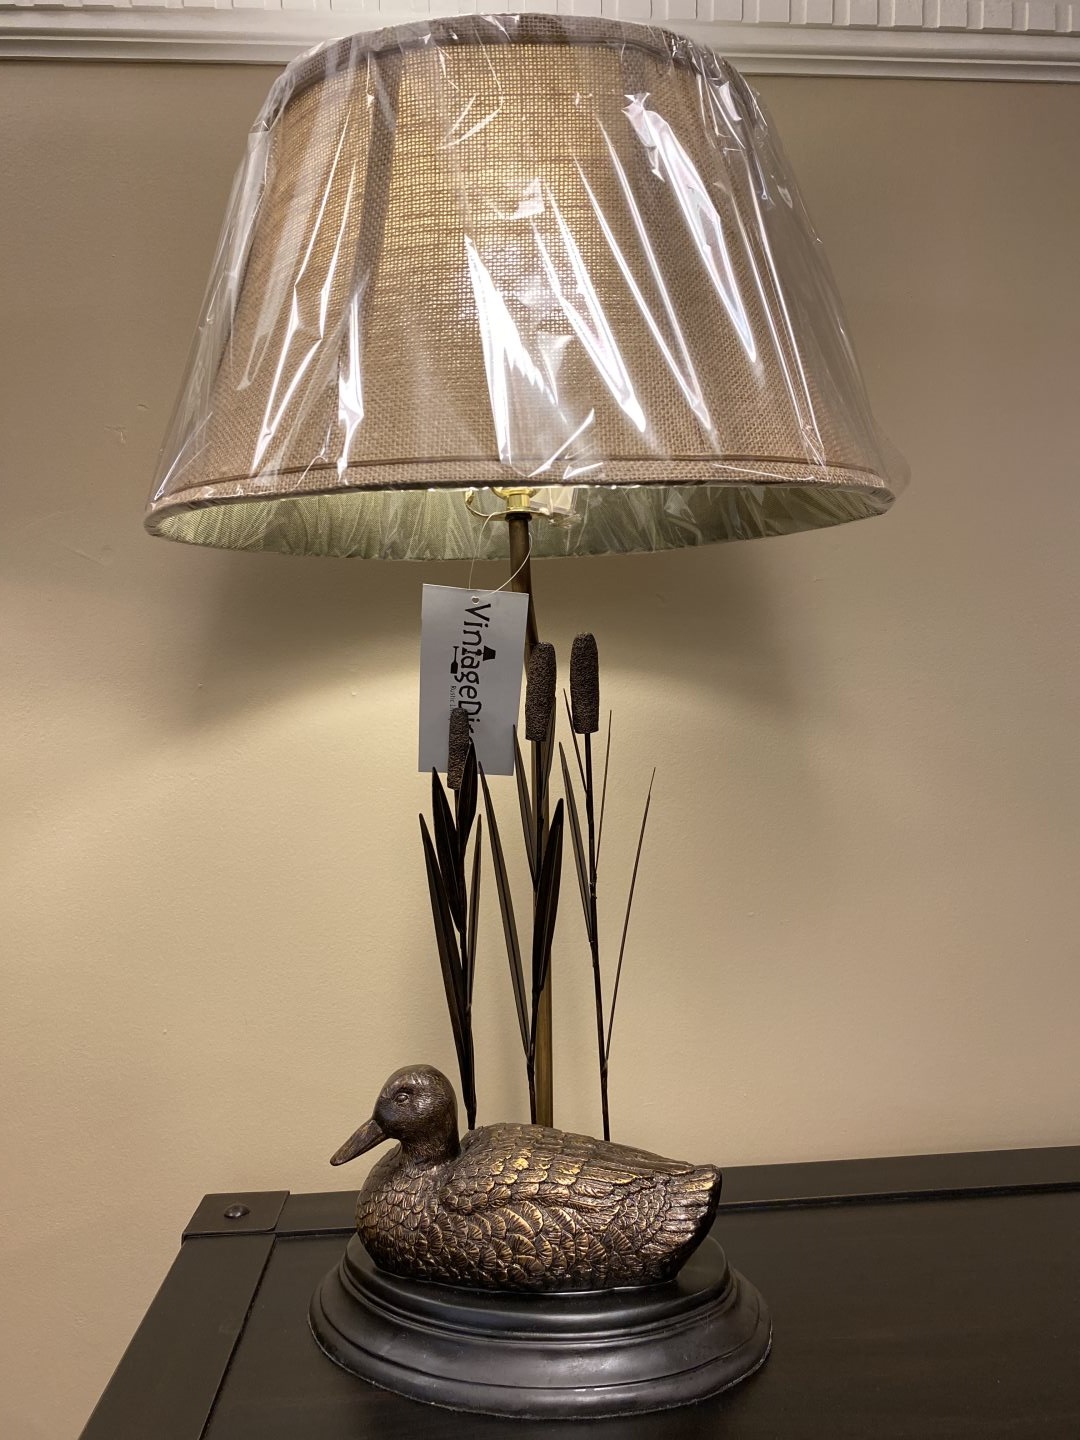 Vintage Direct - CL1341MD - Table Lamp